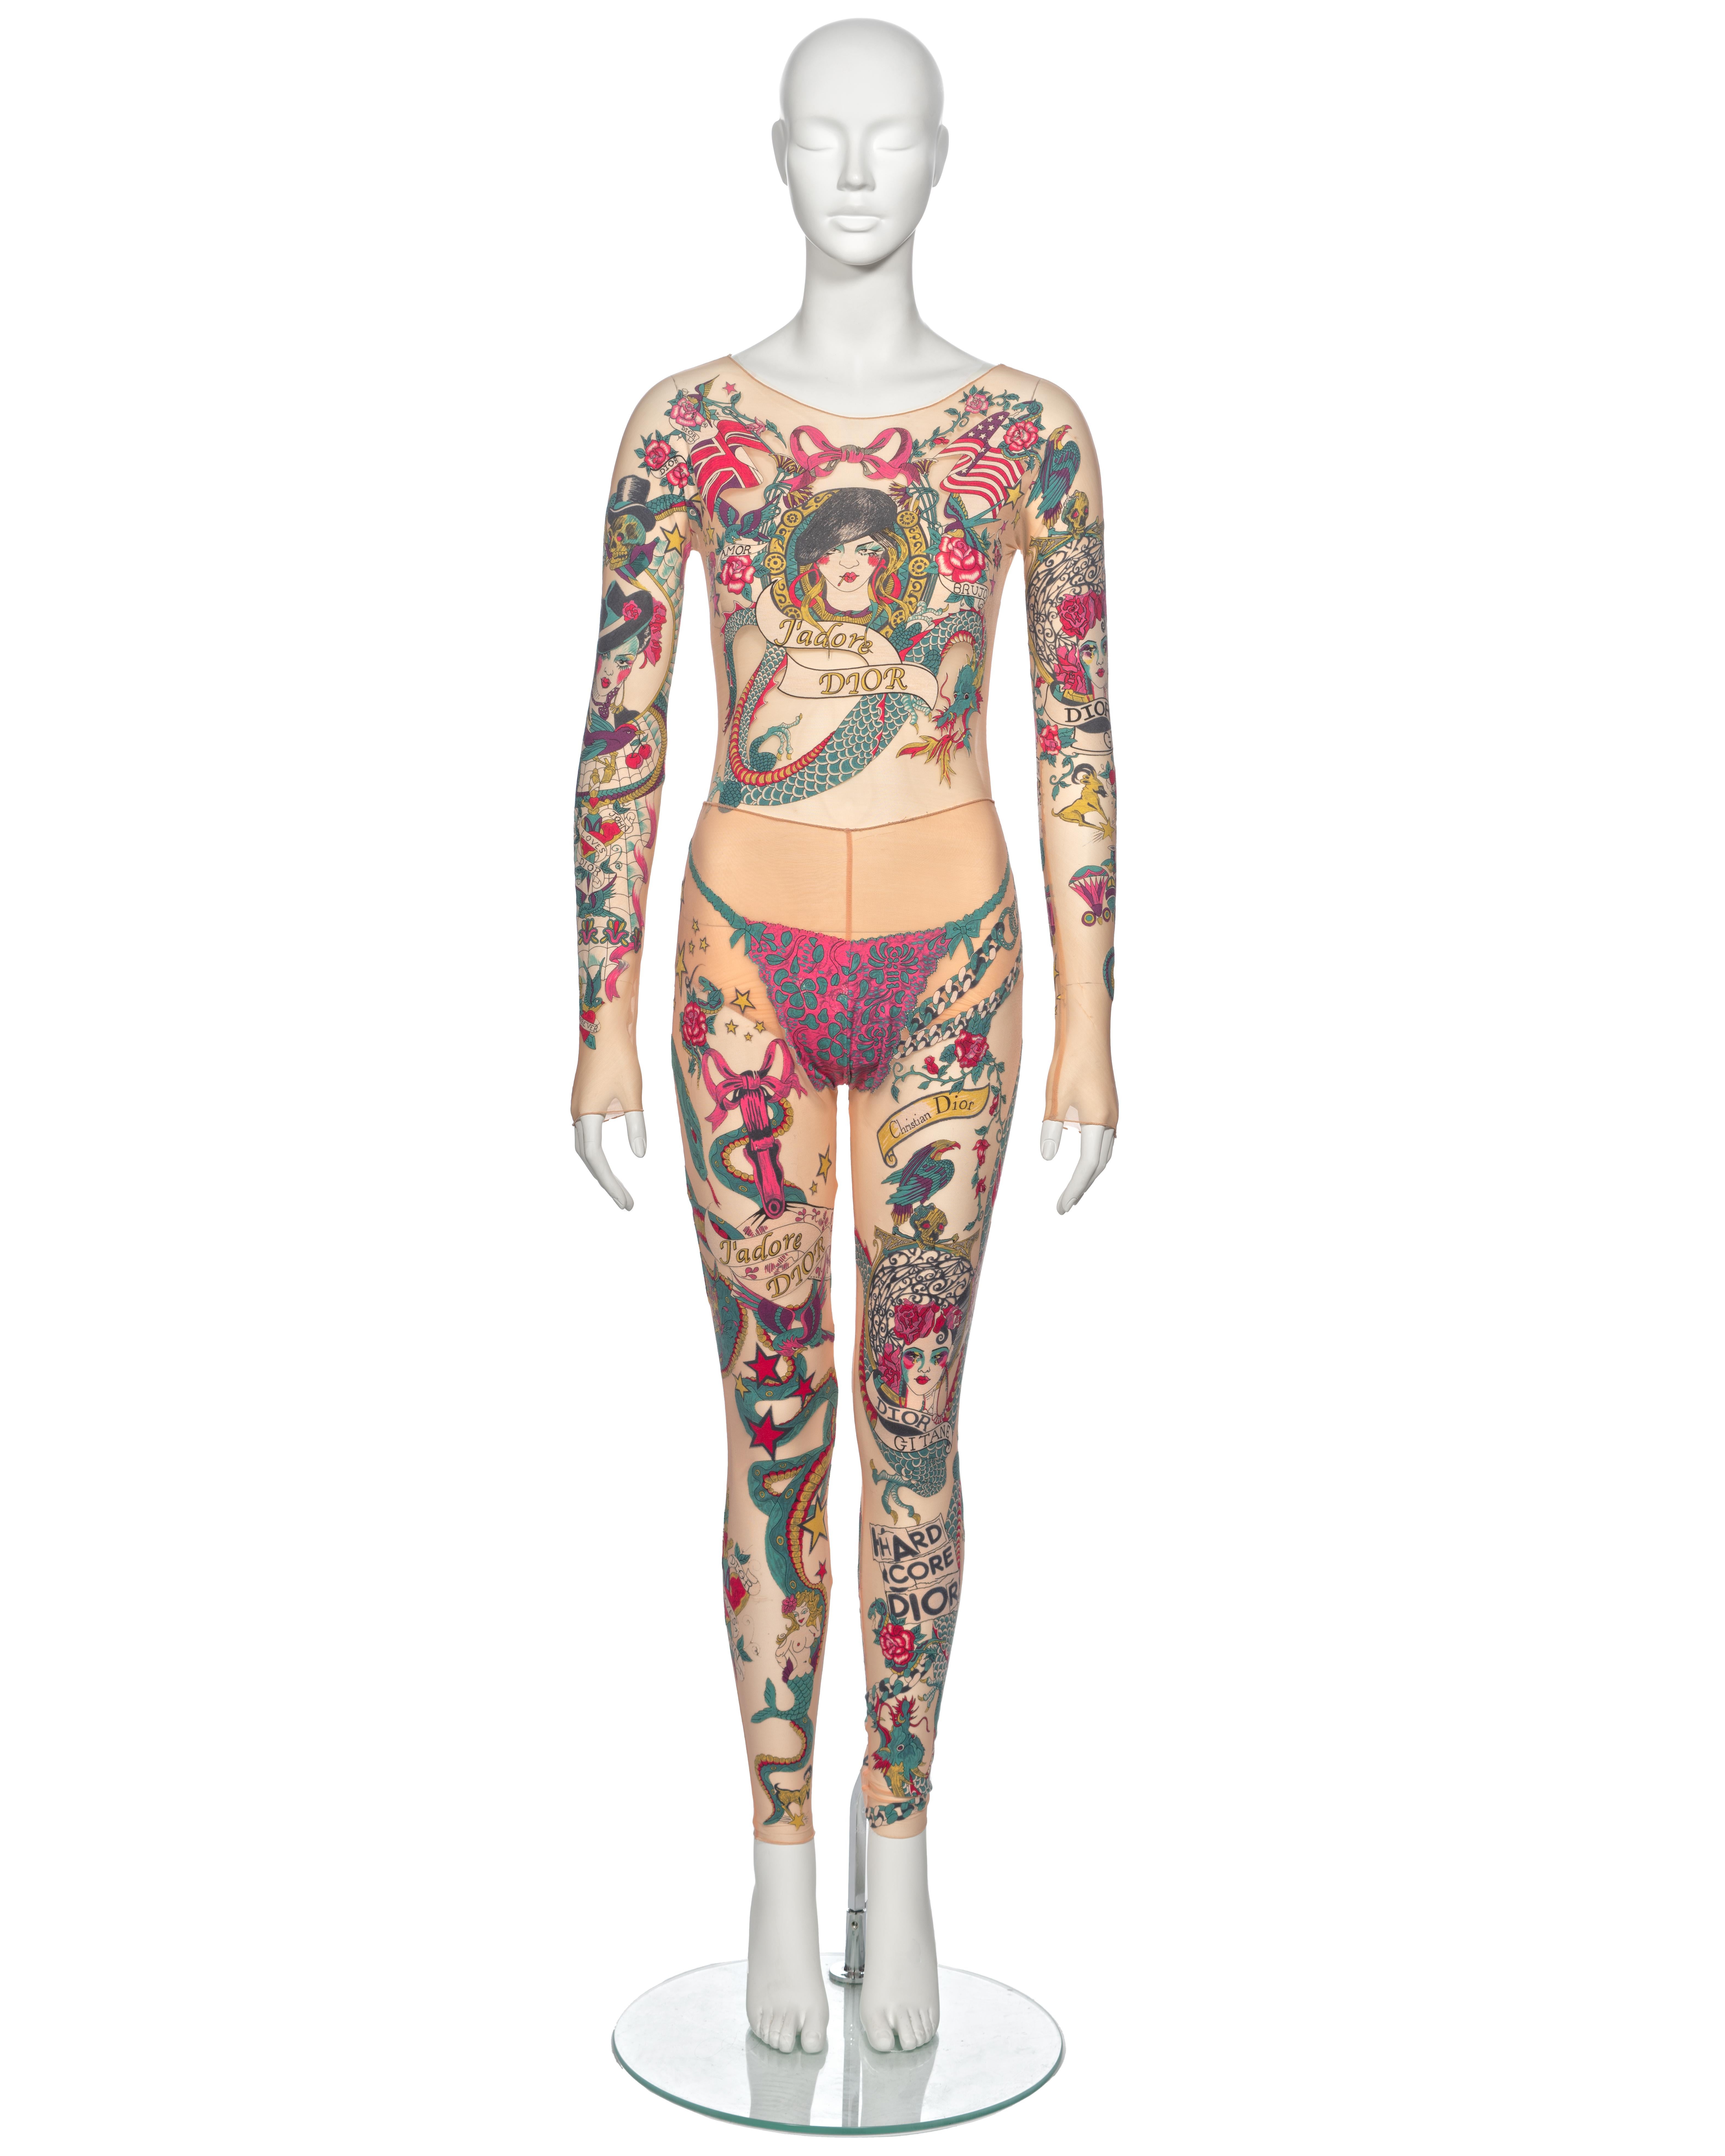 Women's Christian Dior by John Galliano Tattoo Print Body, Leggings and Skirt, ss 2004 For Sale